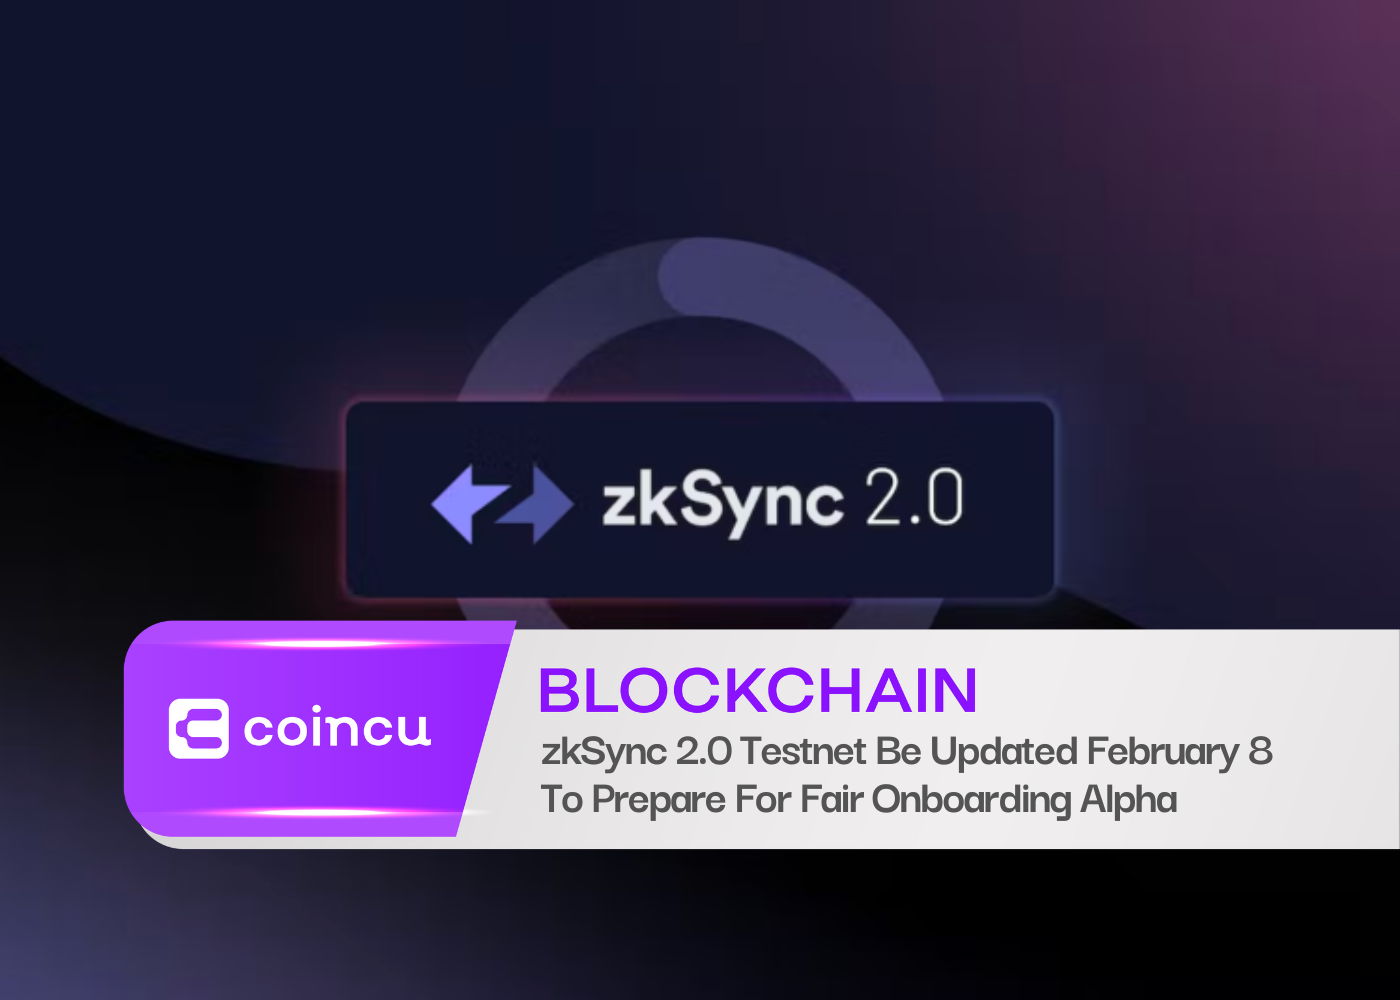 zkSync 2.0 Testnet Be Updated February 8 To Prepare For Fair Onboarding Alpha